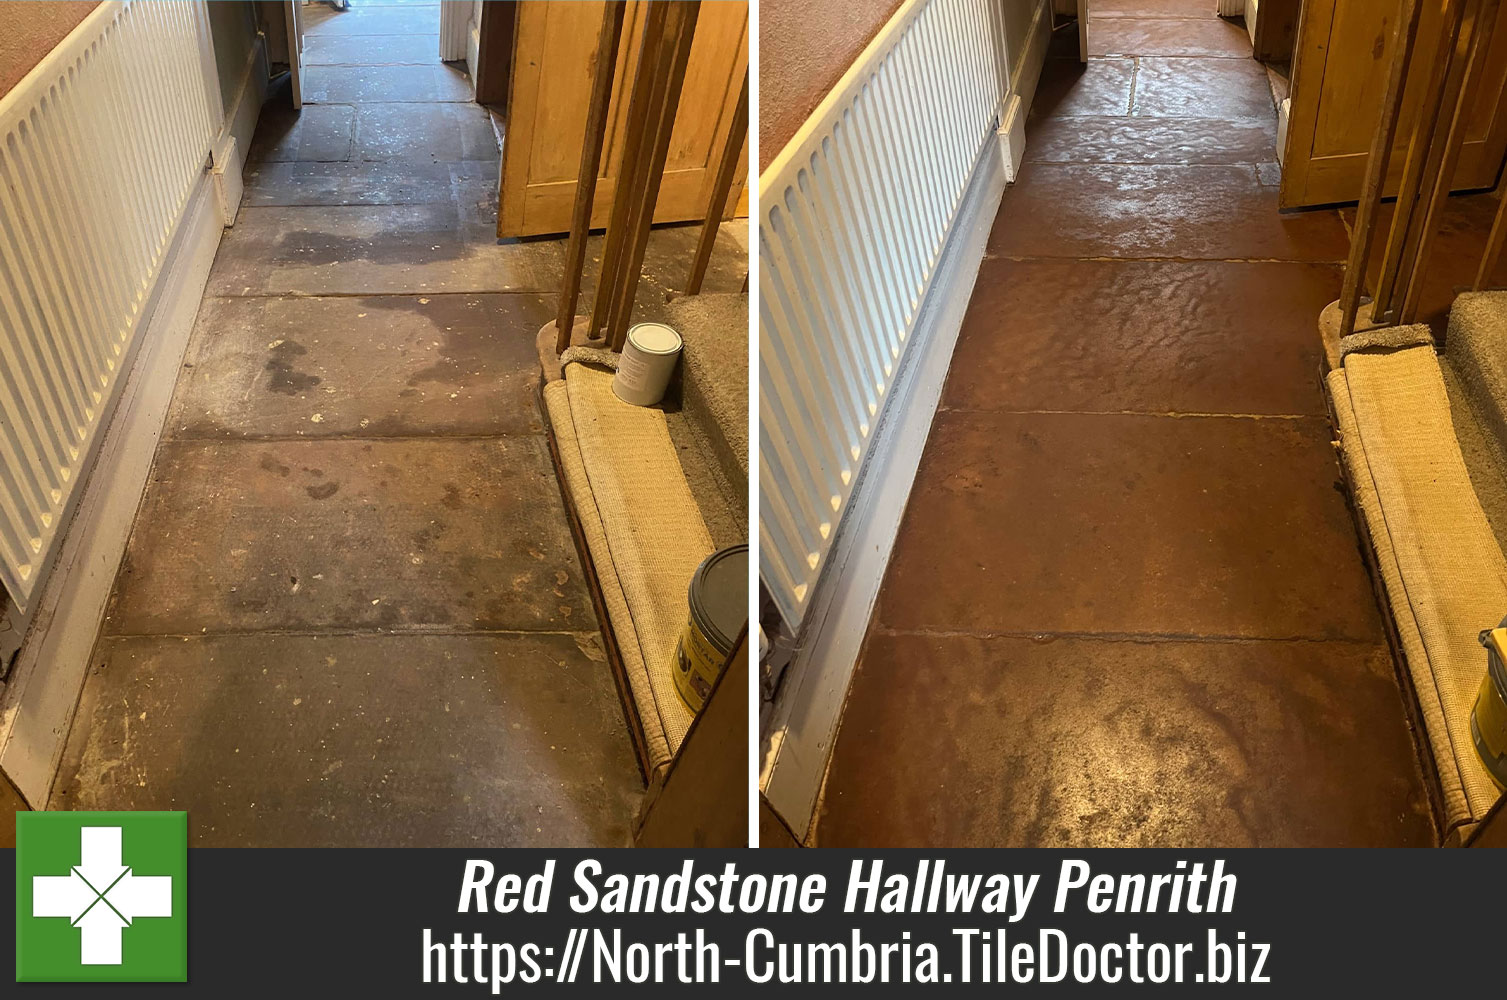 Using Milling Pads to Restore a Flood Damaged Sandstone Floor in Penrith